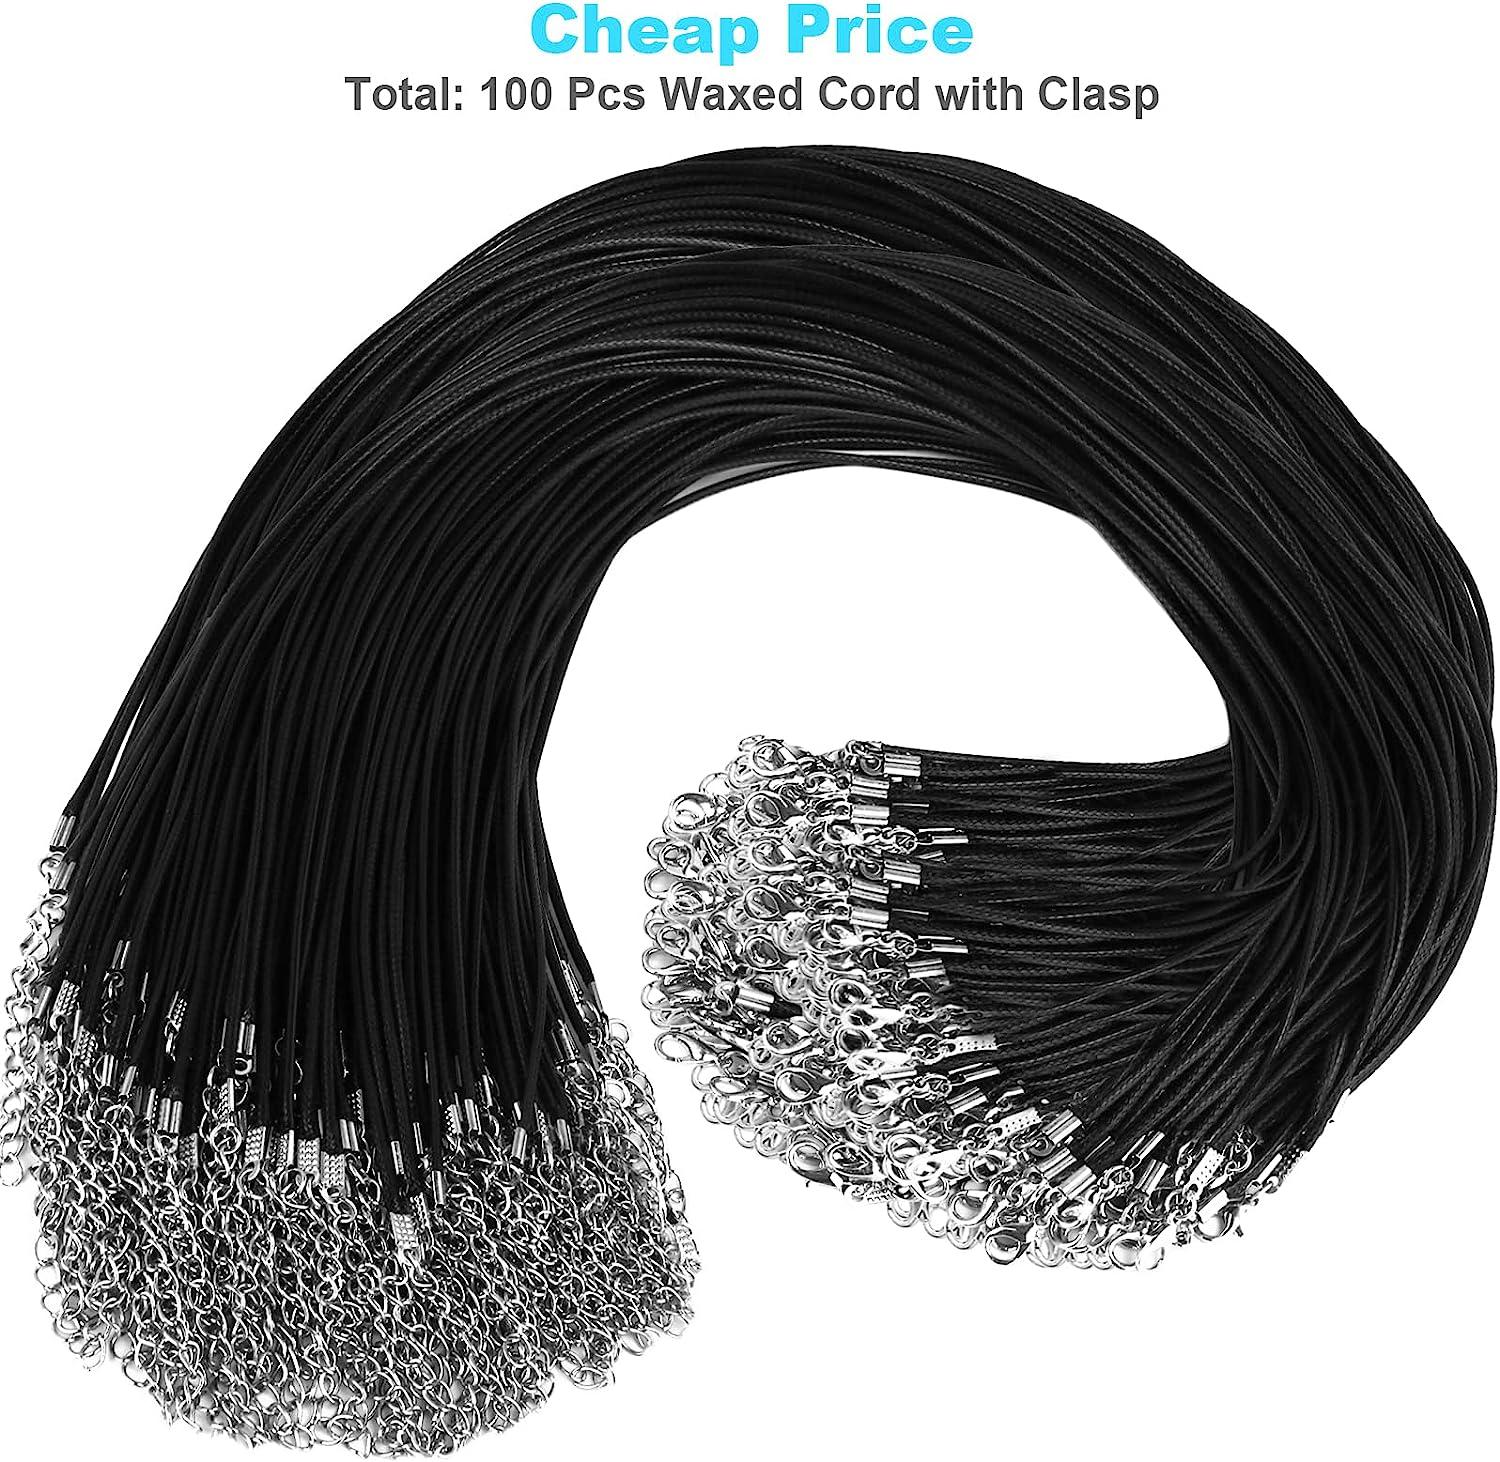 Black Braid Wax Cord Leather Rope Steel Clasp String Chain For Diy Pendant  Necklace Jewelry Making Cordon Cuero Para Colgante